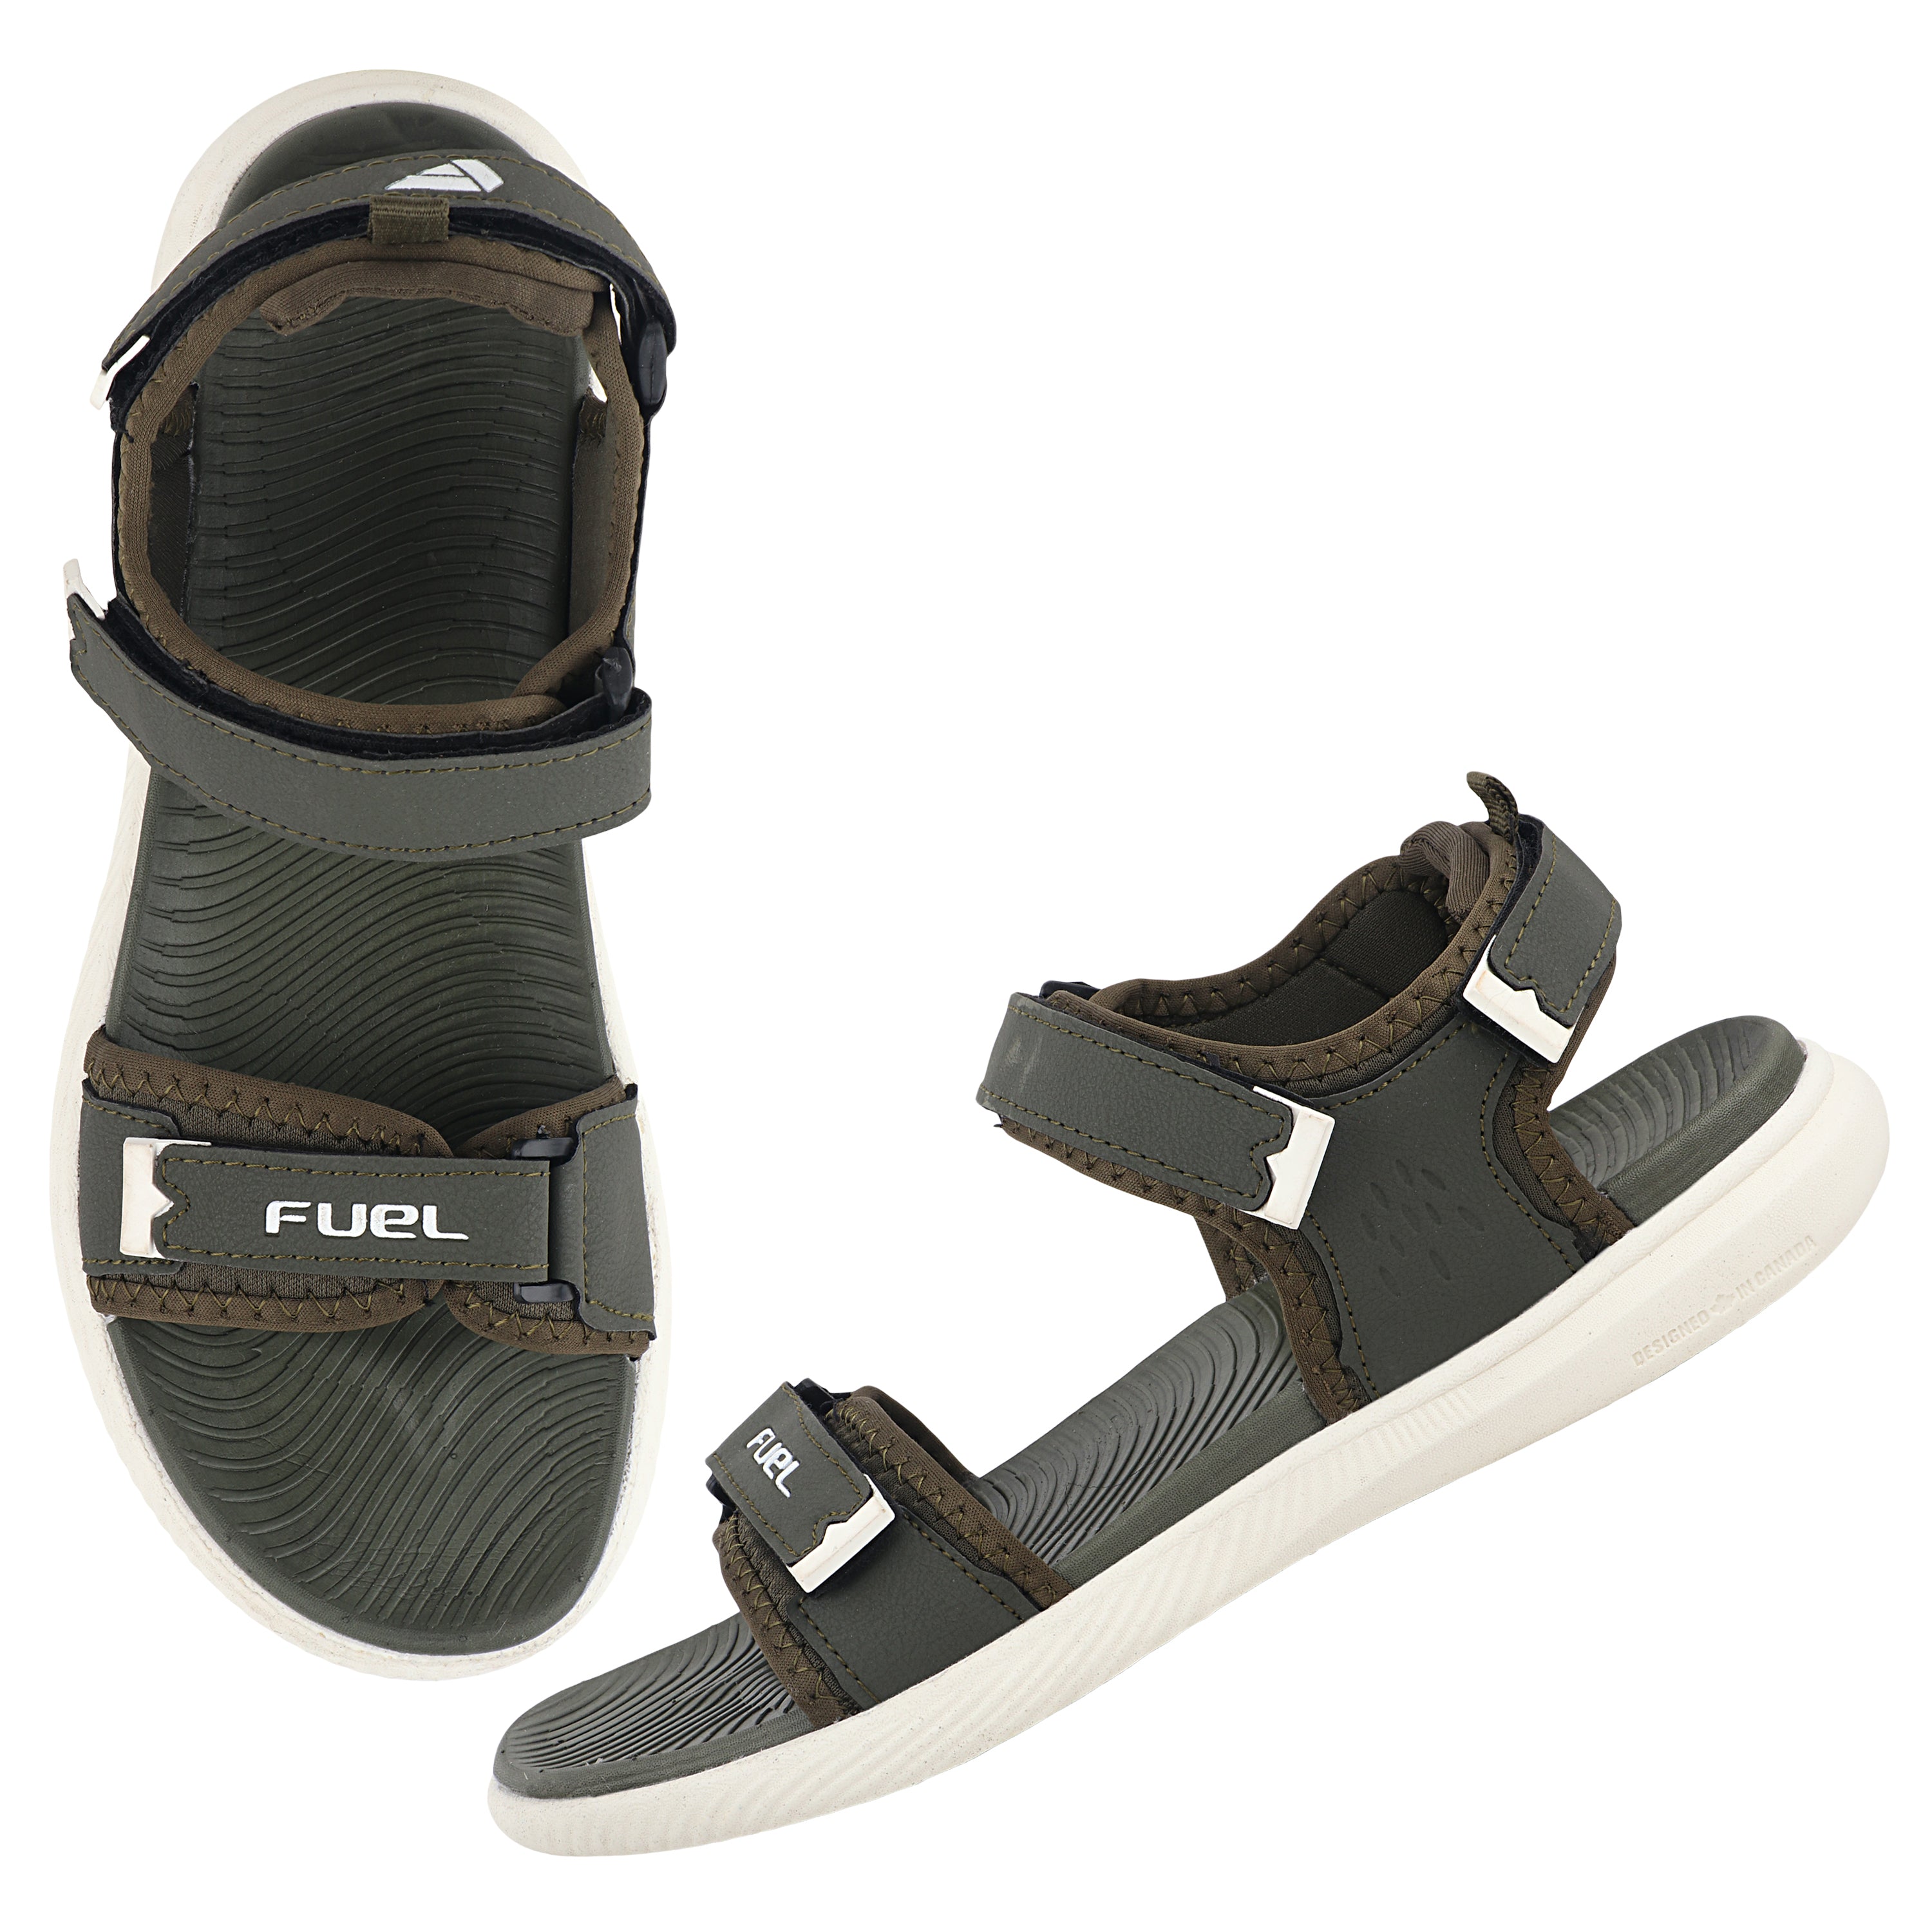 Fuel Power-Lite Sandals For Women's (Olive)